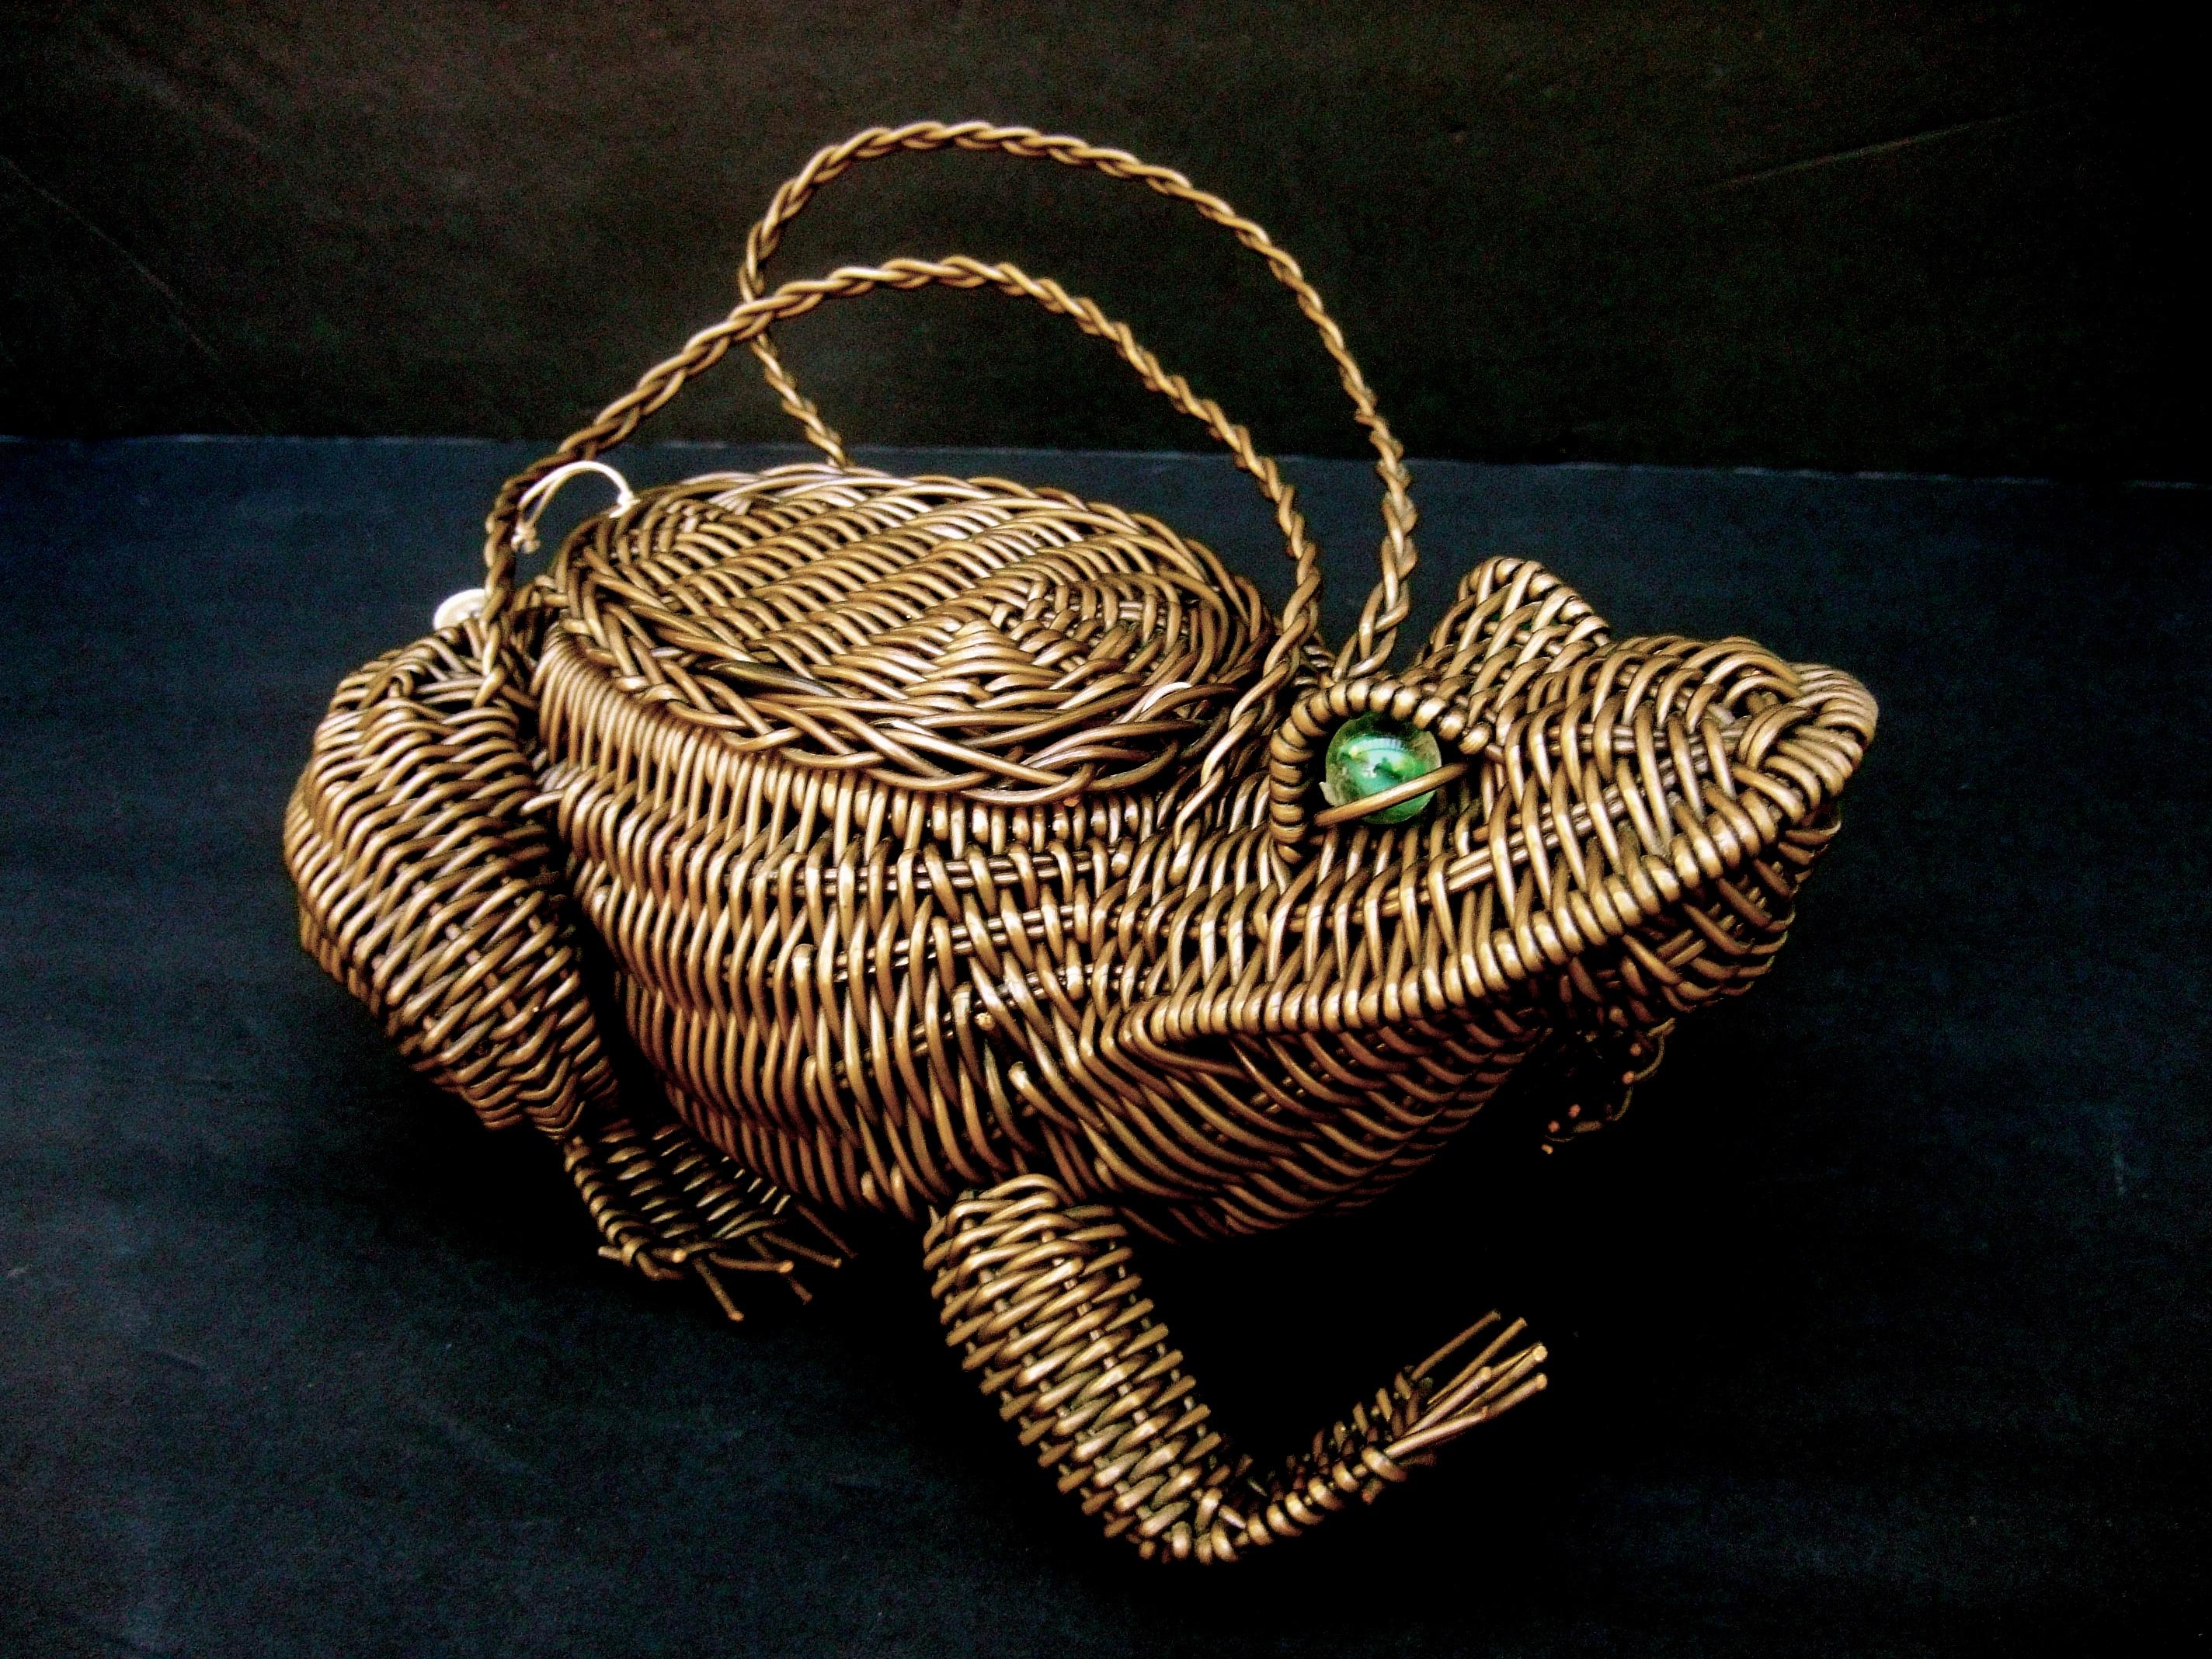 Whimsical figural wicker frog design handbag c 1960s 
The quirky handmade artisan handbag is designed in the shape
of an endearing frog 

Adorned with a pair of green glass marble eyes. Carried with a pair
of matching woven wicker handle straps. The